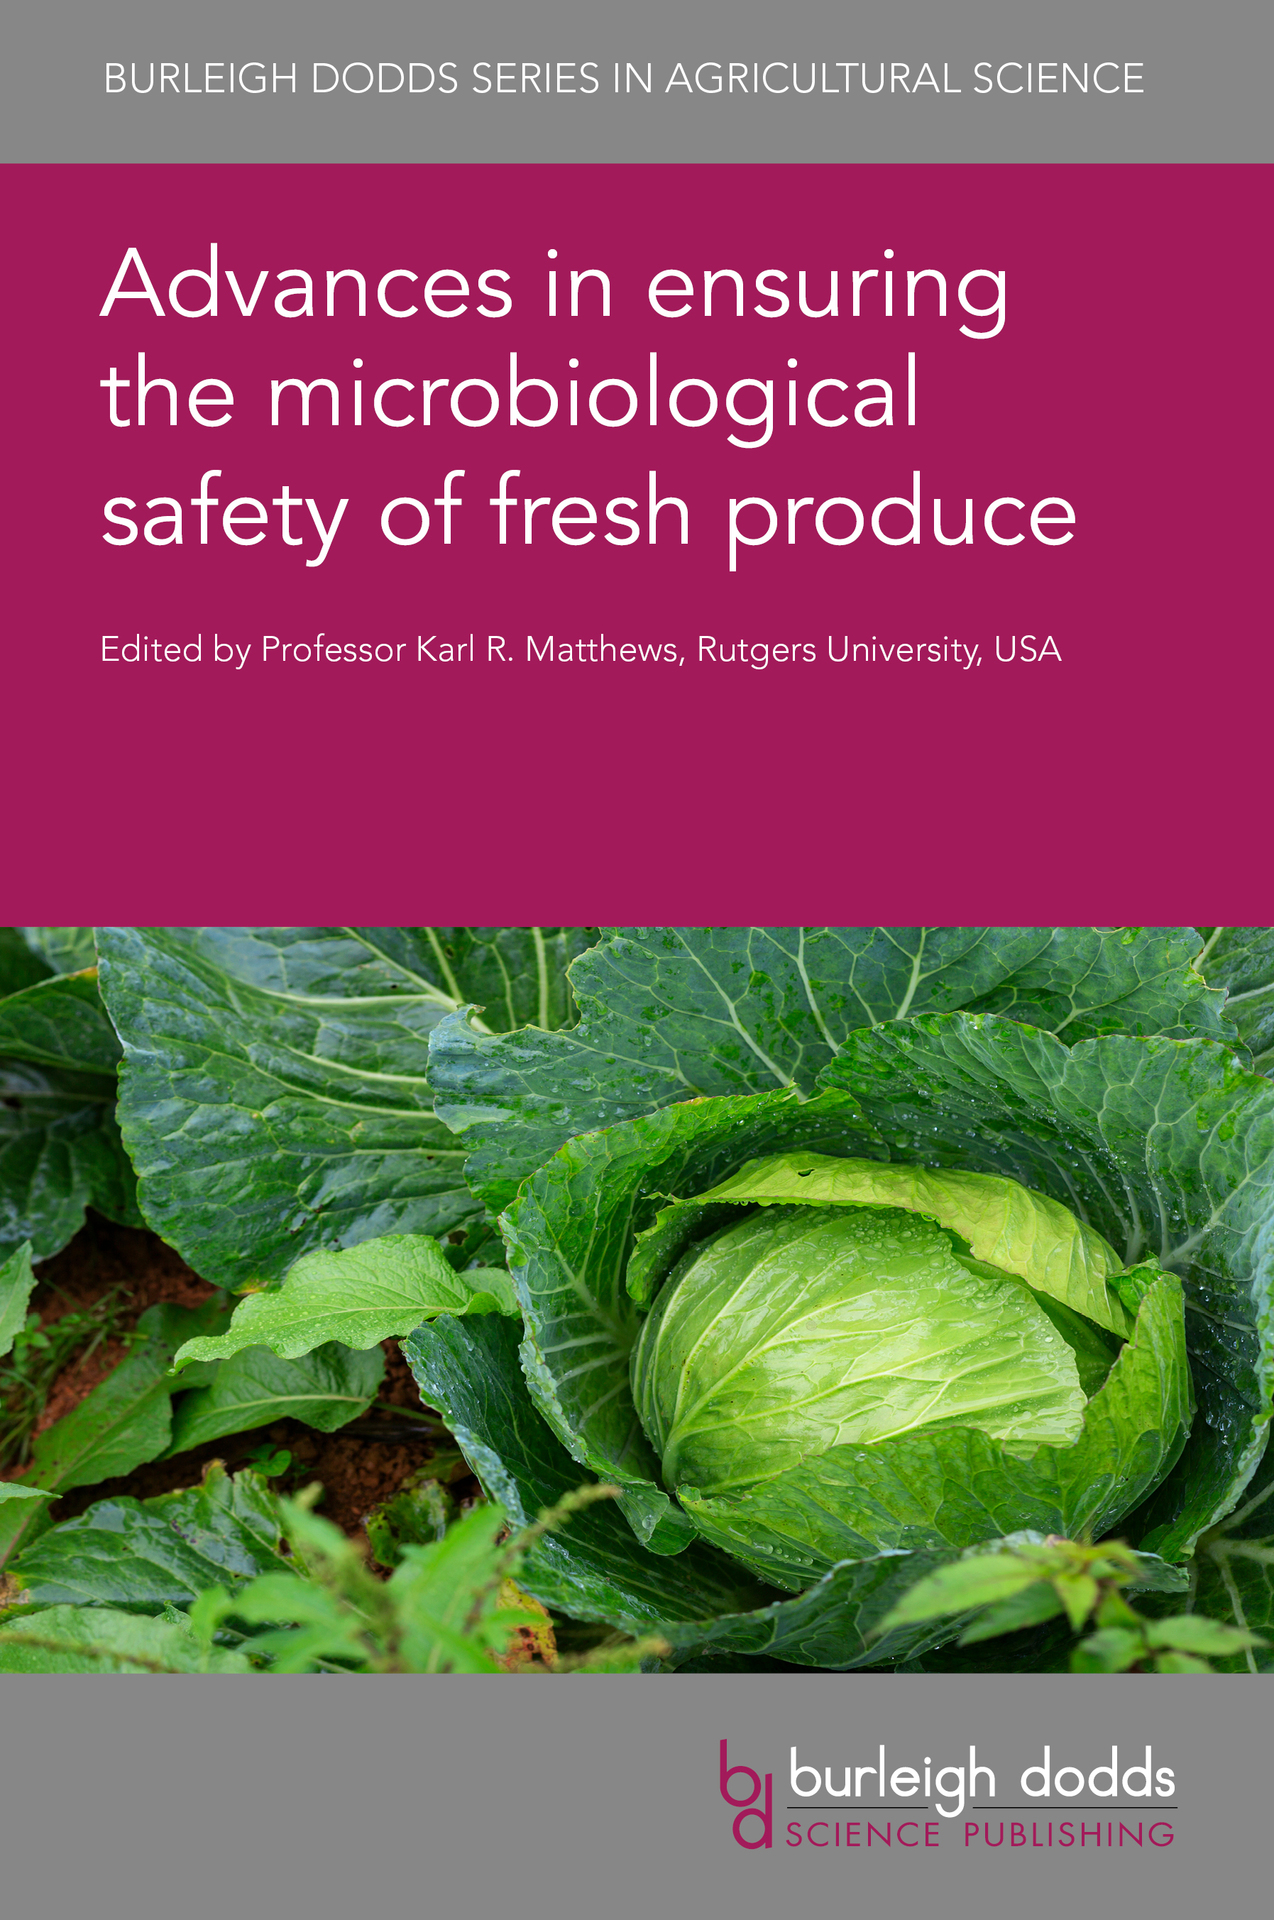 Advances in ensuring the microbiological safety of fresh produce